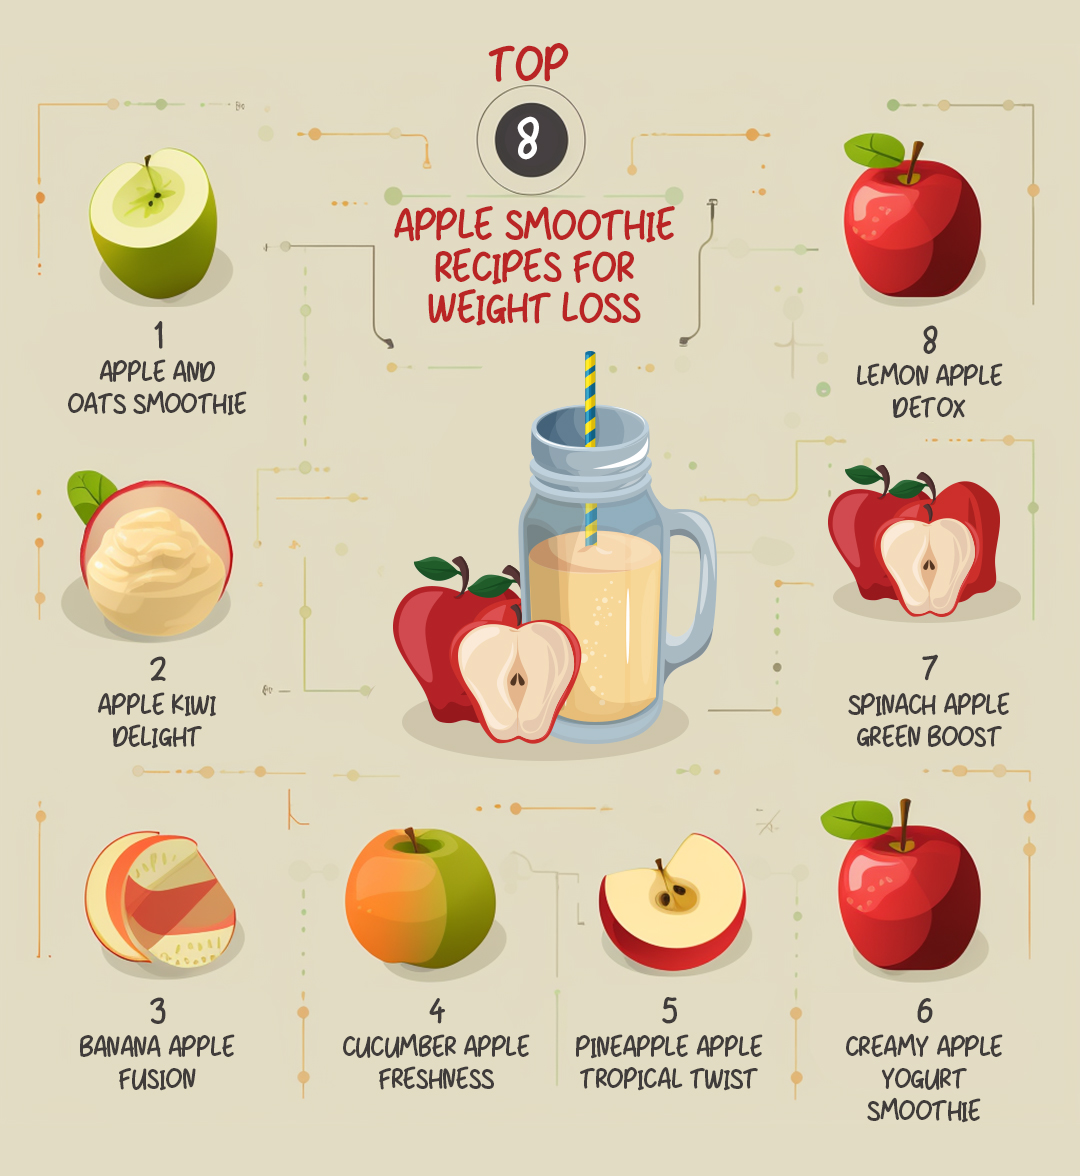 apple smoothie recipes for weight loss image